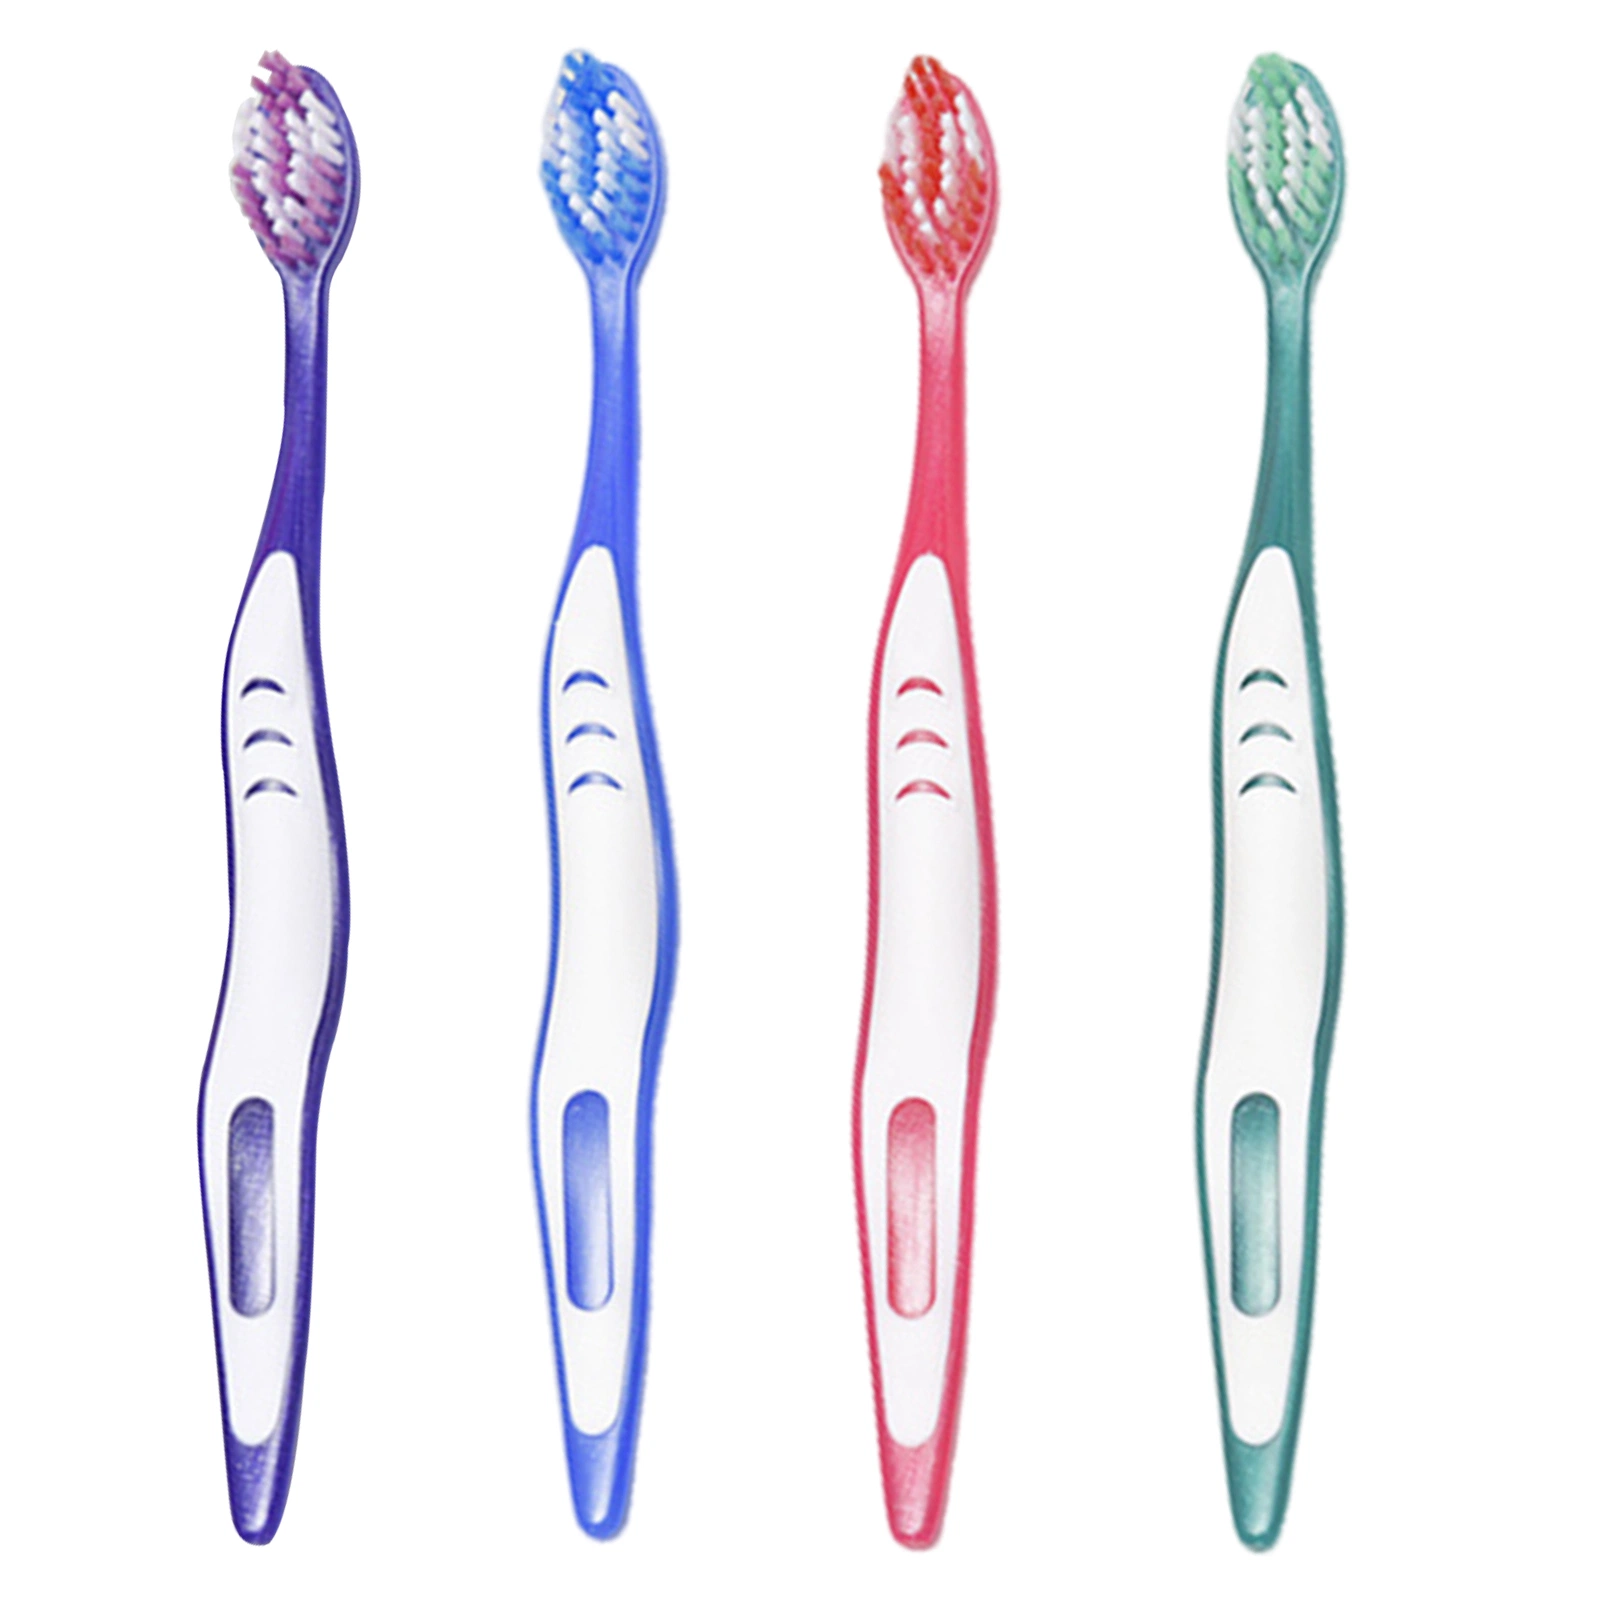 OEM Oral Care Nylon Bristle Toothbrush Customizable Logo and Packaging